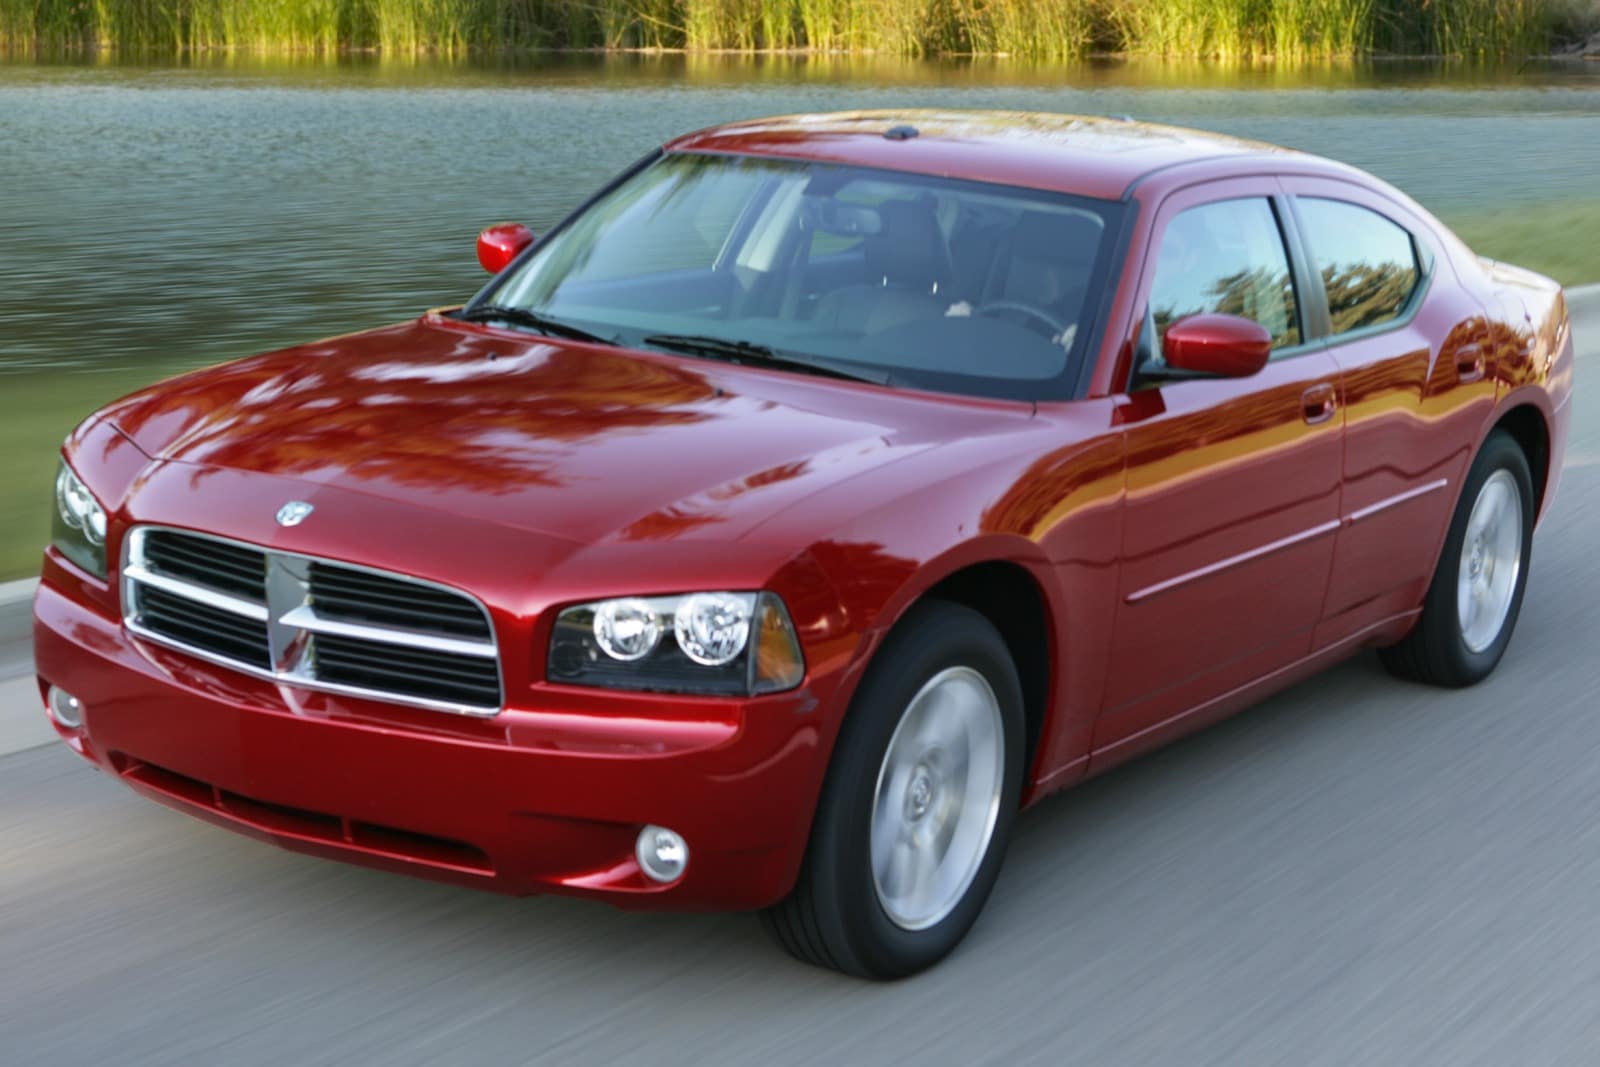 2010 Dodge Charger Review & Ratings | Edmunds